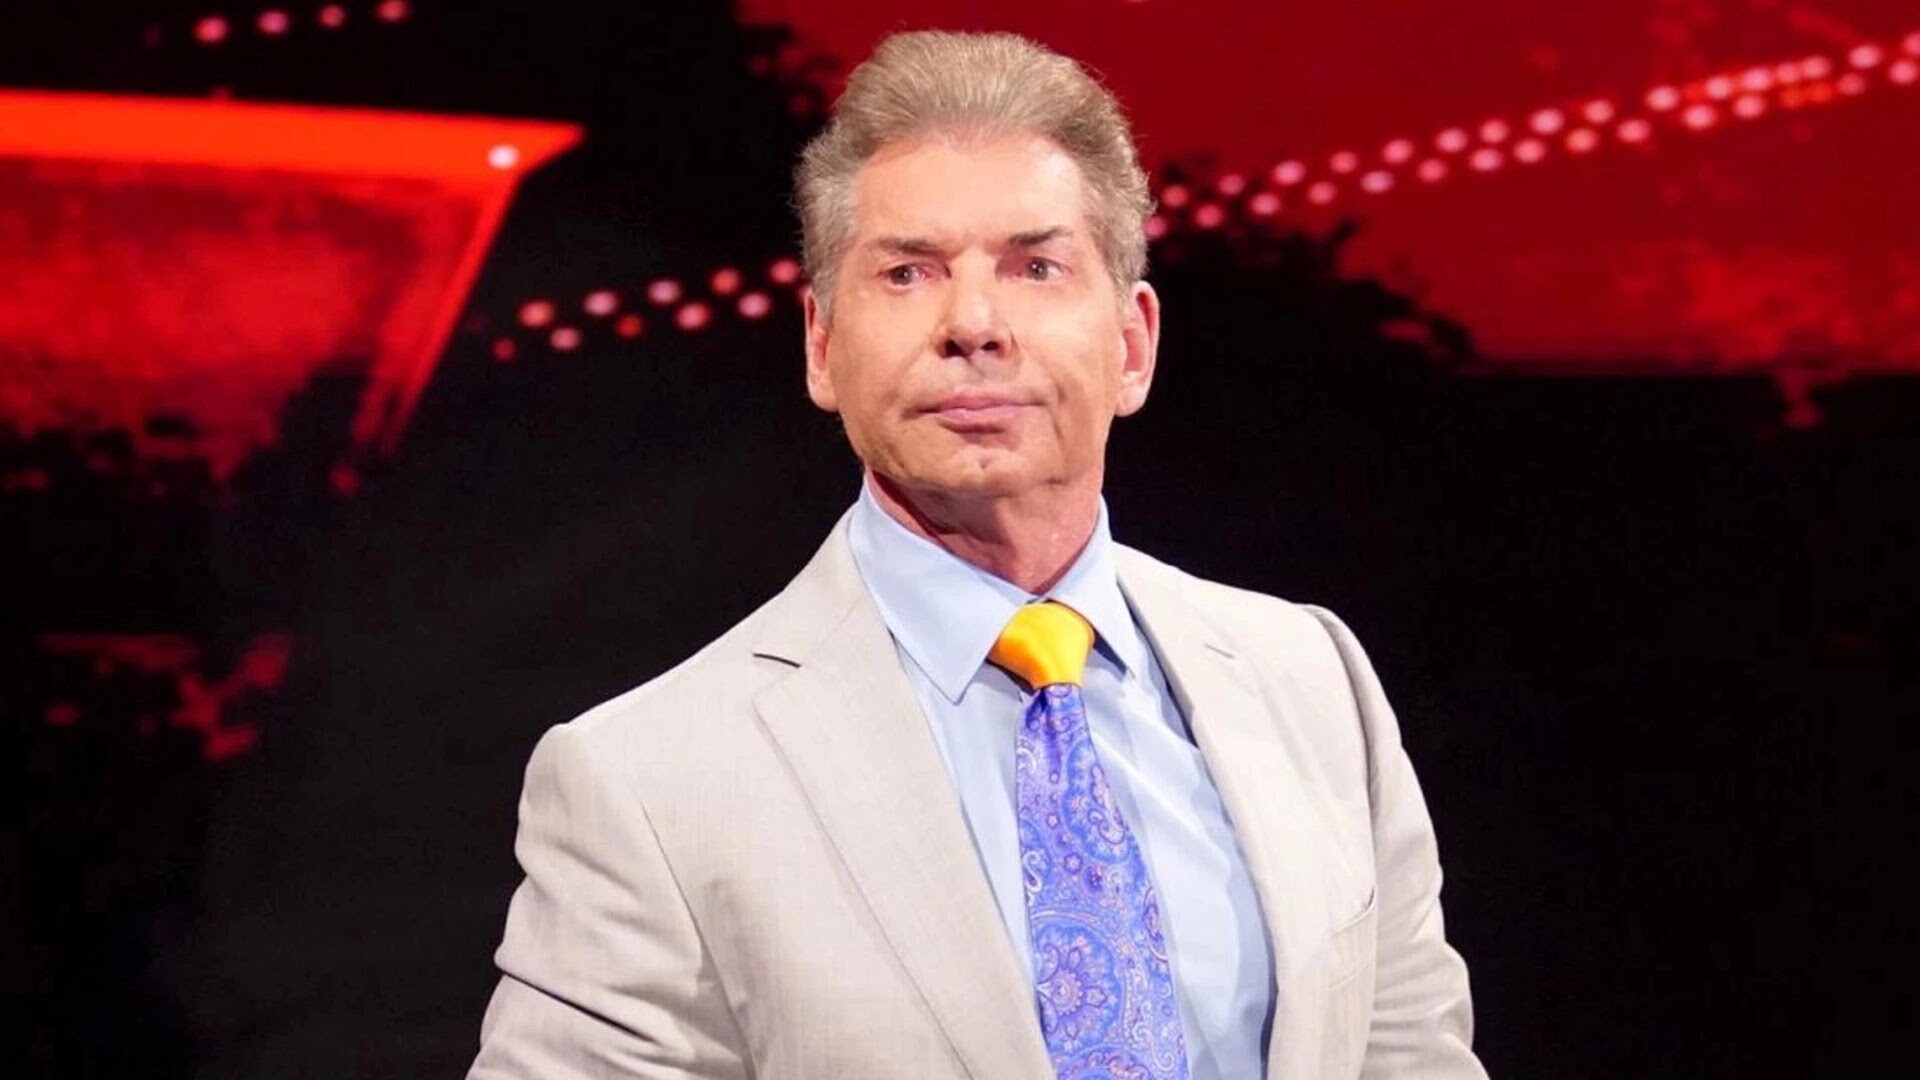 Vince McMahon To Appear On SmackDown After Stepping Back As WWE CEO